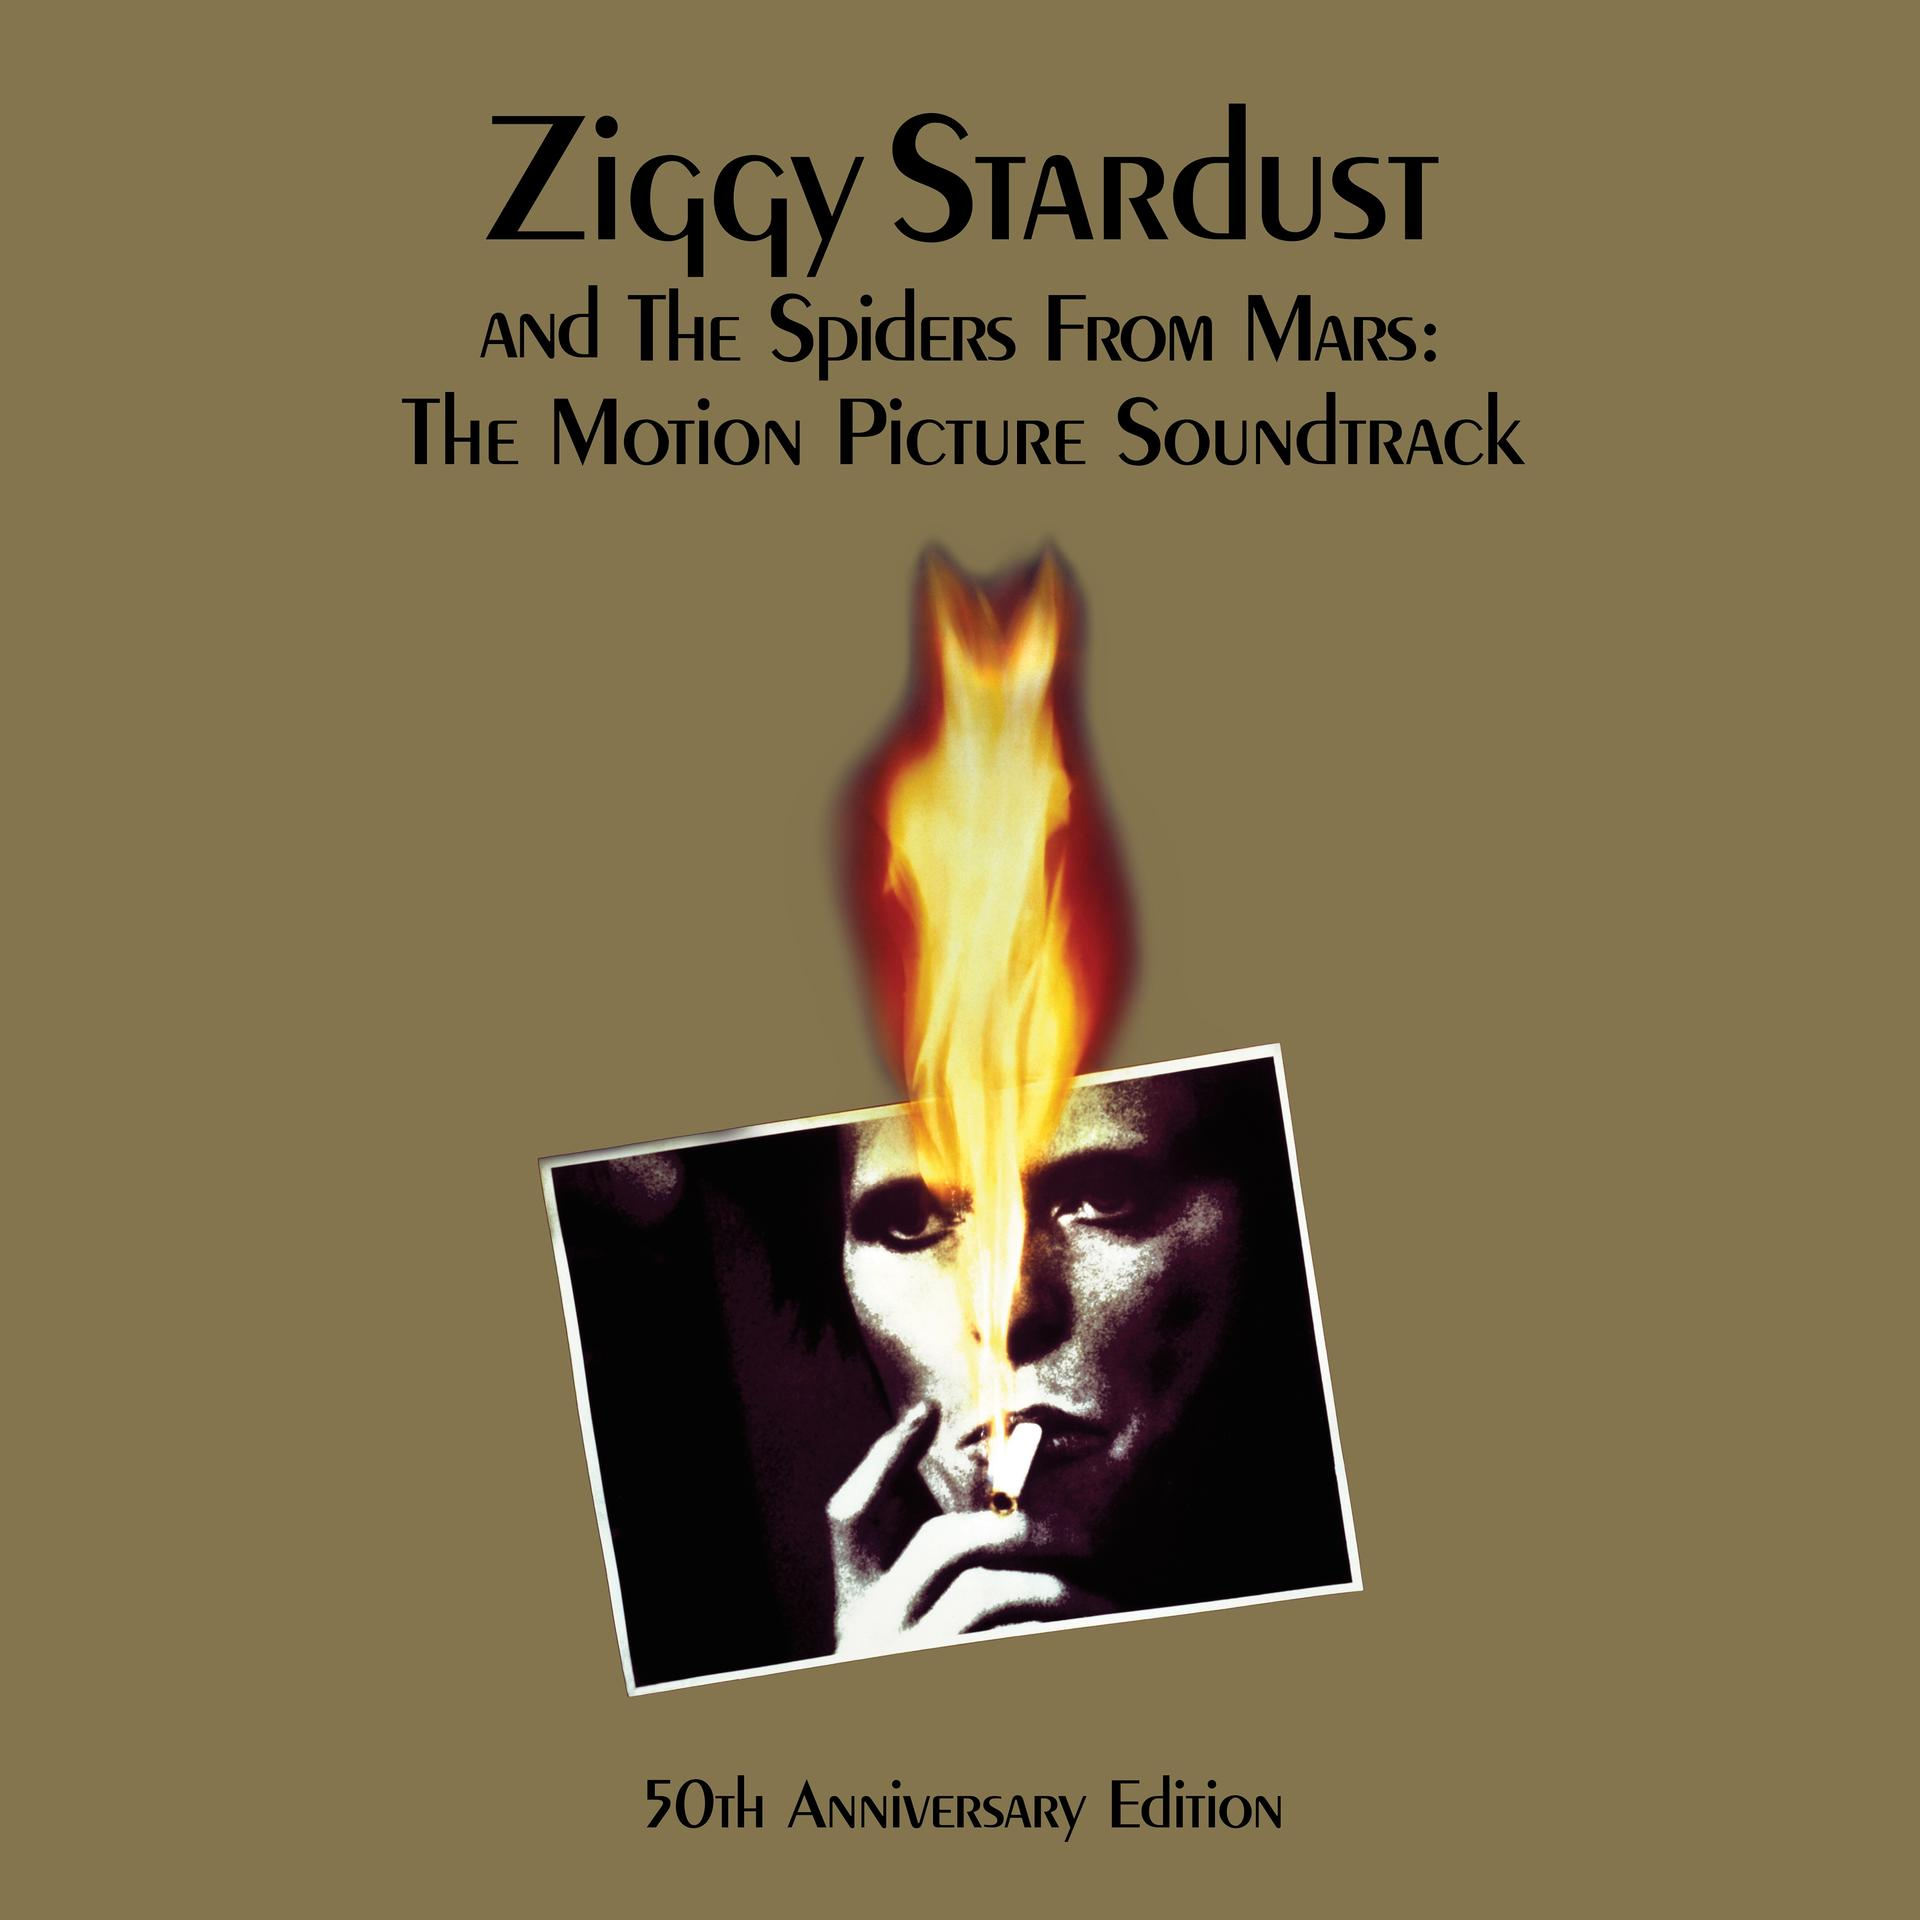 Ziggy The Spiders - and (Vinyl) - Bowie Stardust David From Mars: